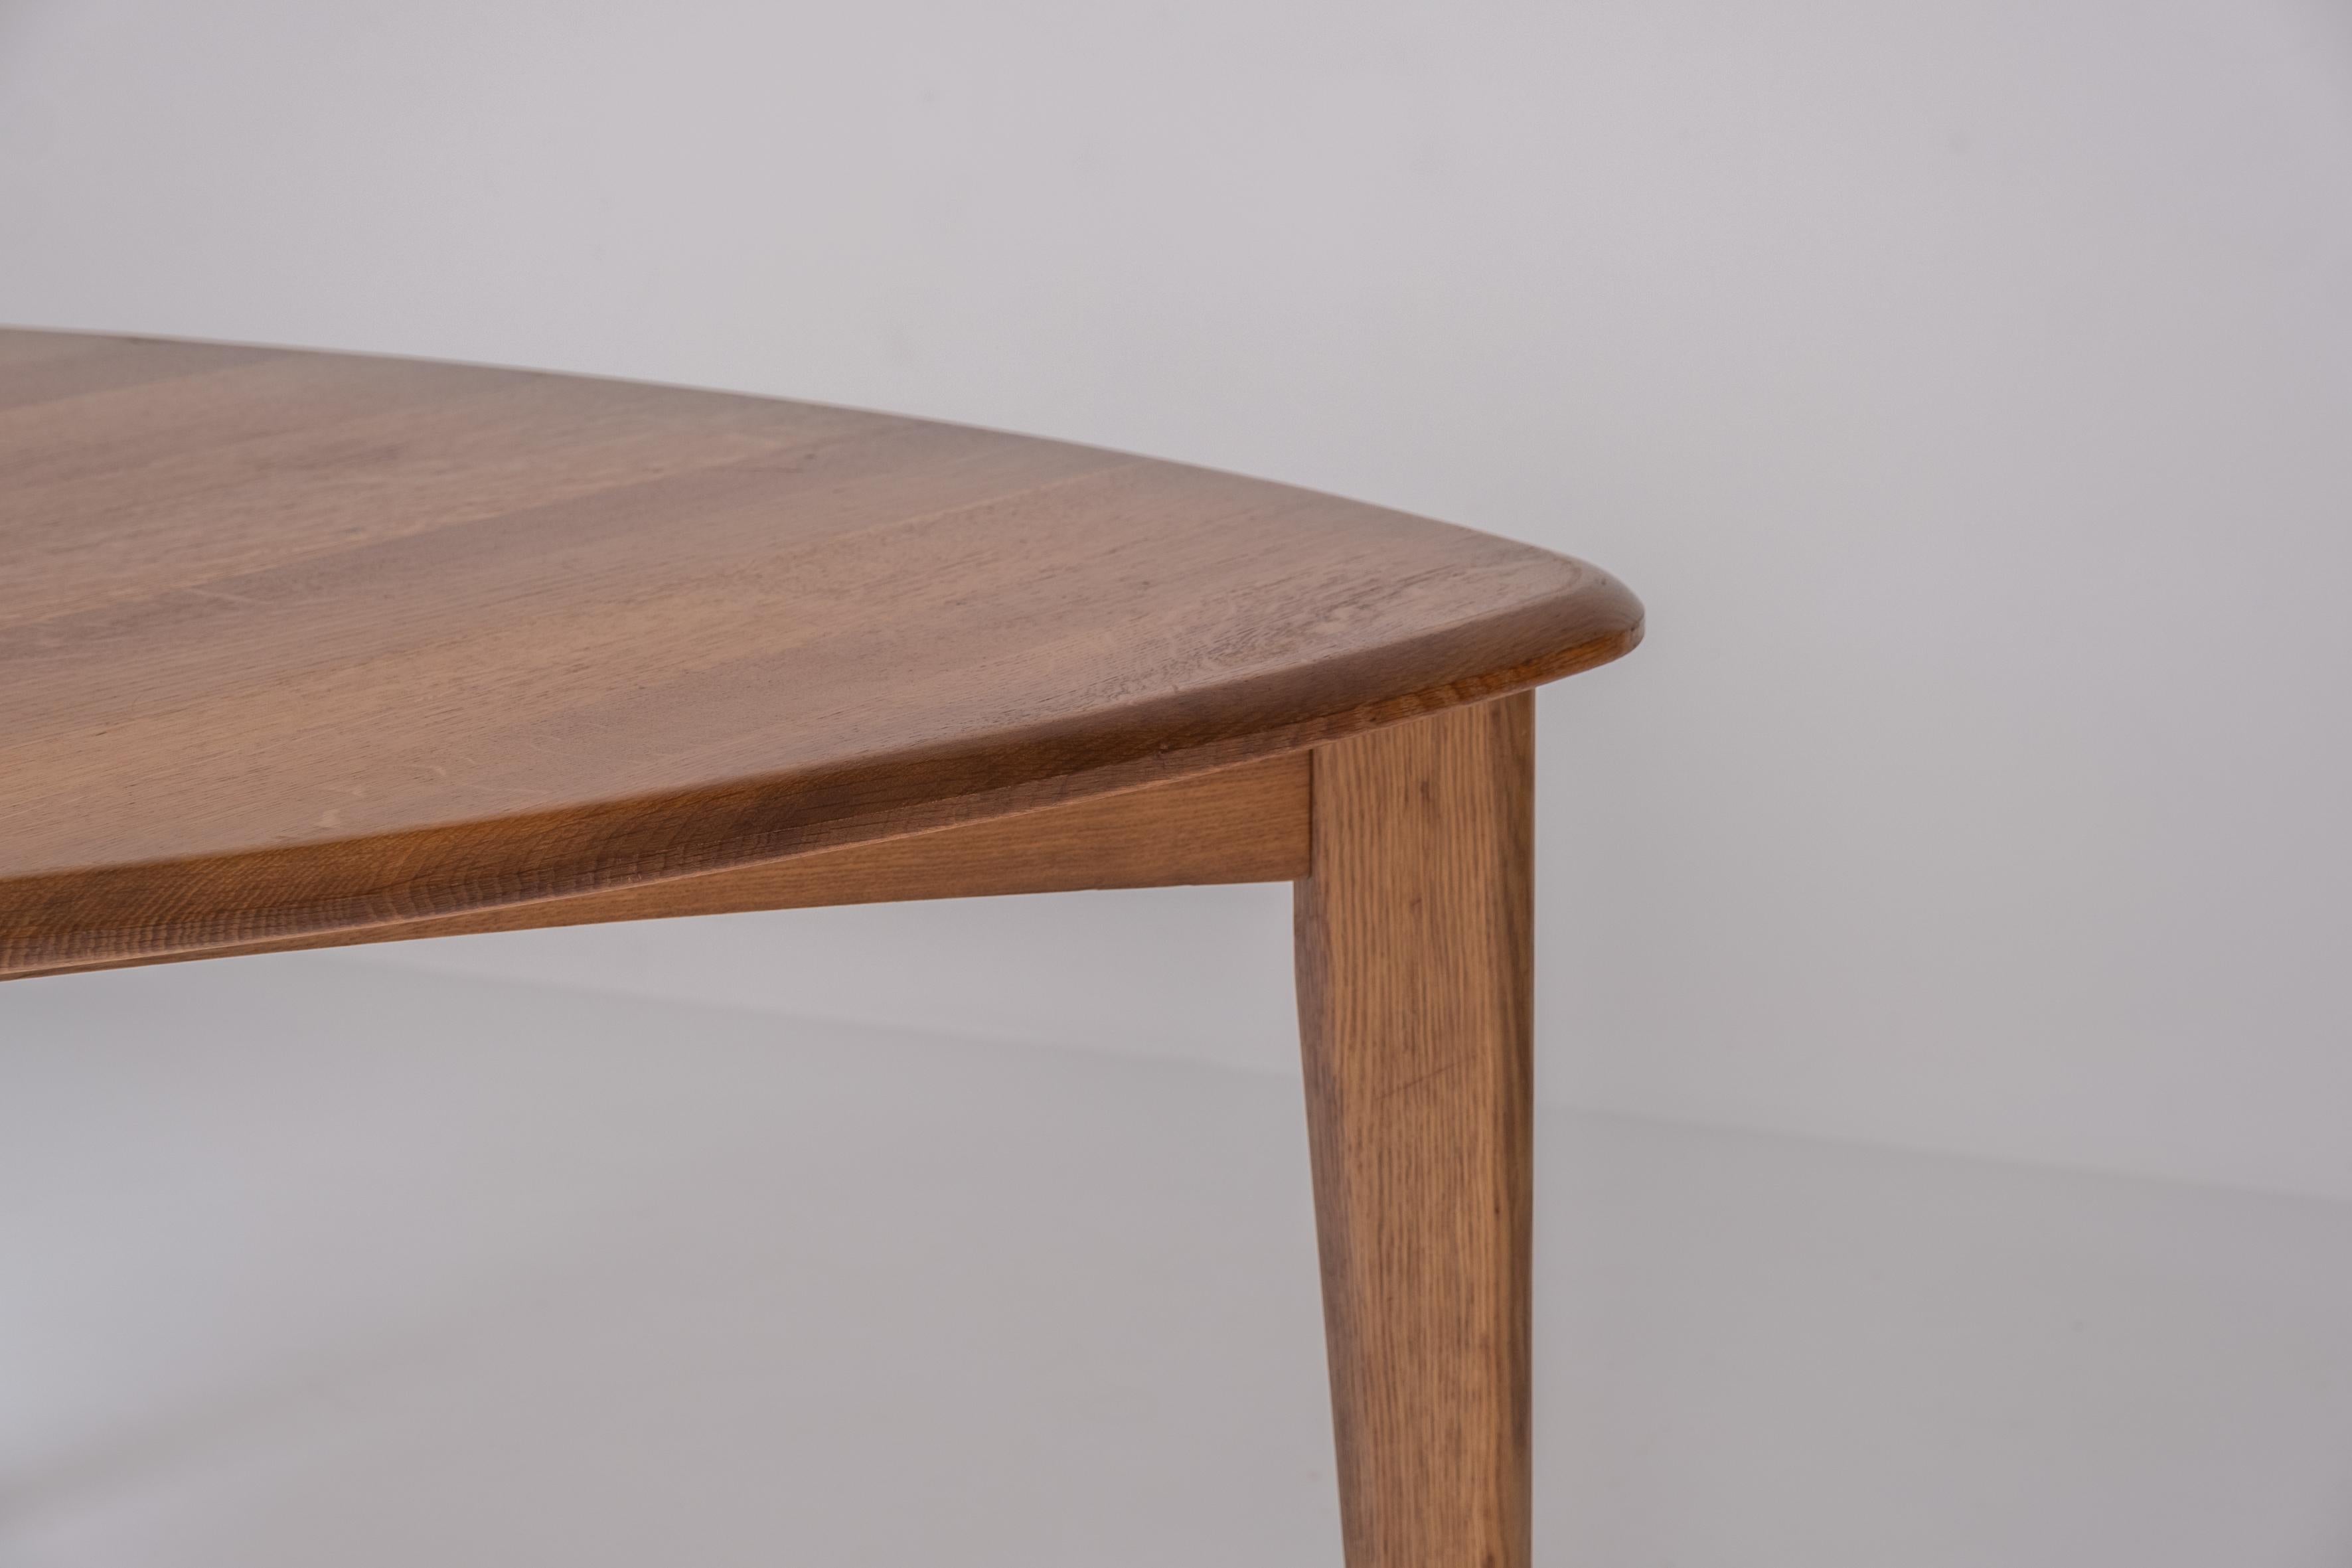 Mid-Century Modern Solid Oak Triangle Shaped Dining Table from France, Designed in the 1960s